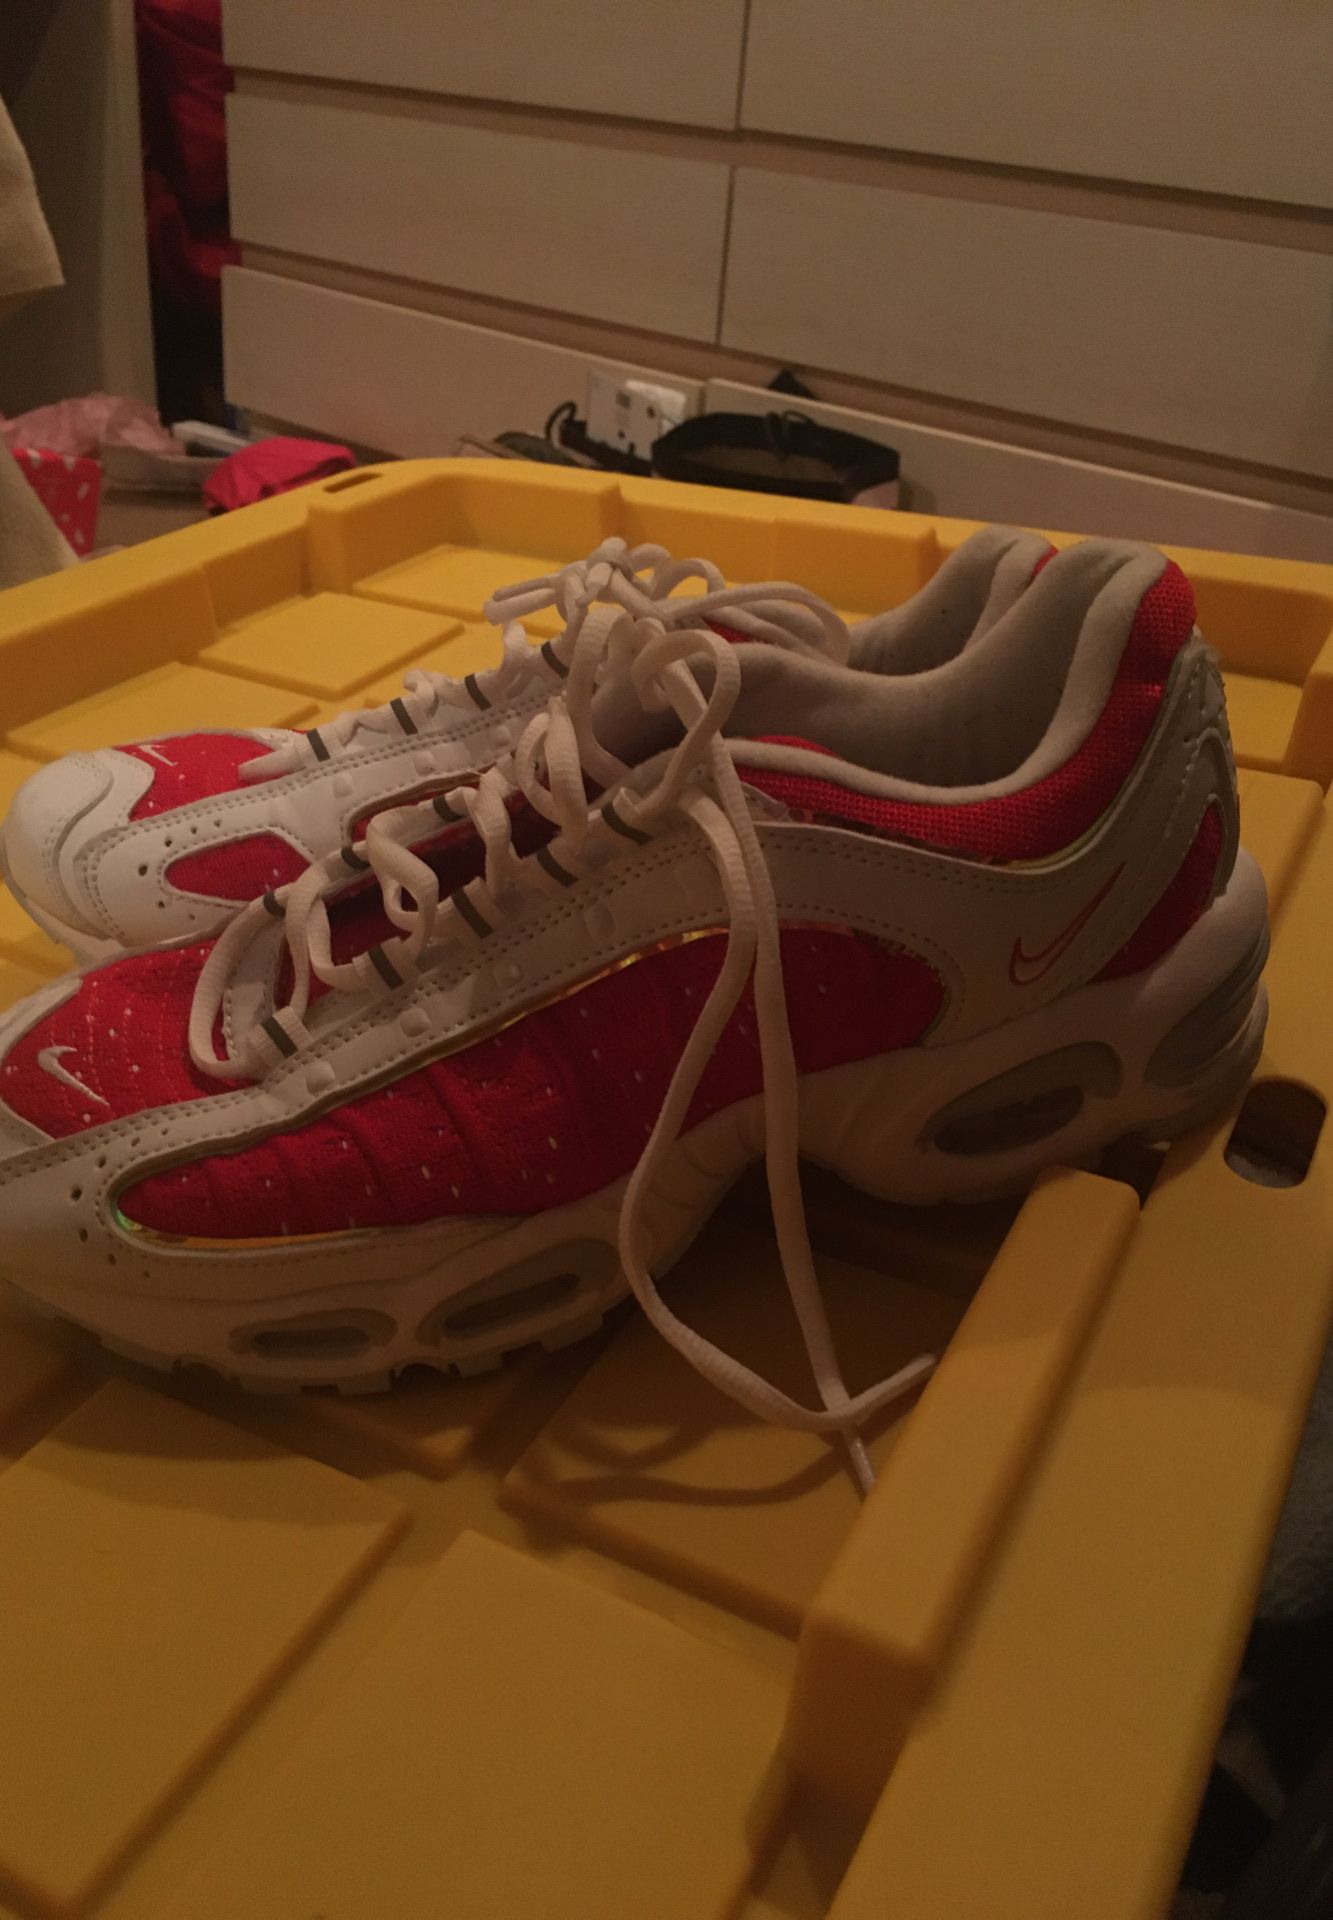 Nike supreme shoes size 8 and a half and worn once